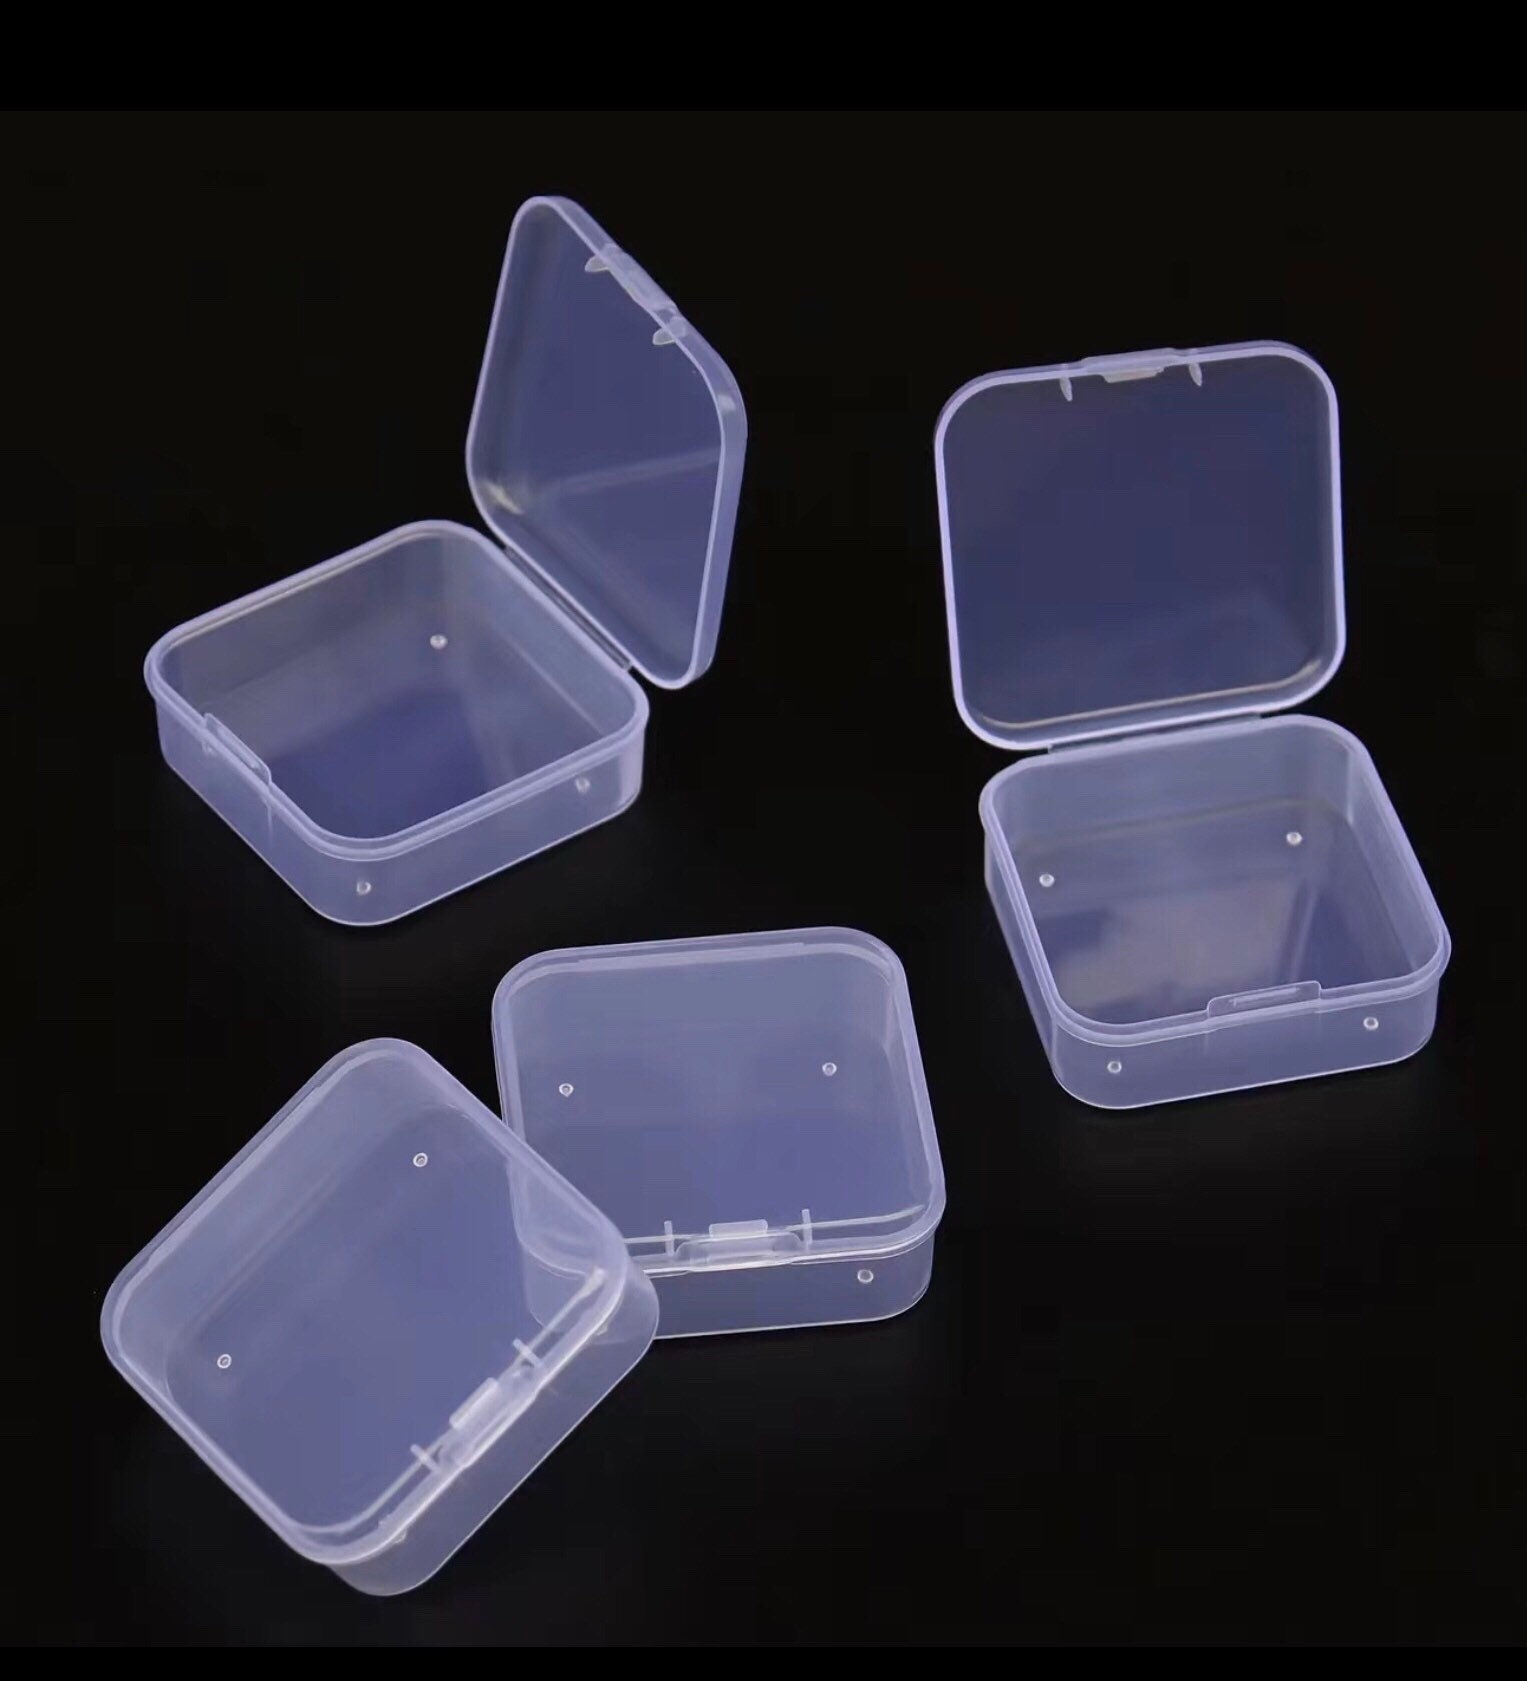 Free Shipping Worldwide 60 Small Plastic Boxes 1.75 X 1.75 Cm X 0.75 craft  Organizer Plastic Box Nail Jewelry Bead Storage Container US Seller Bx-246  , small plastic food containers 